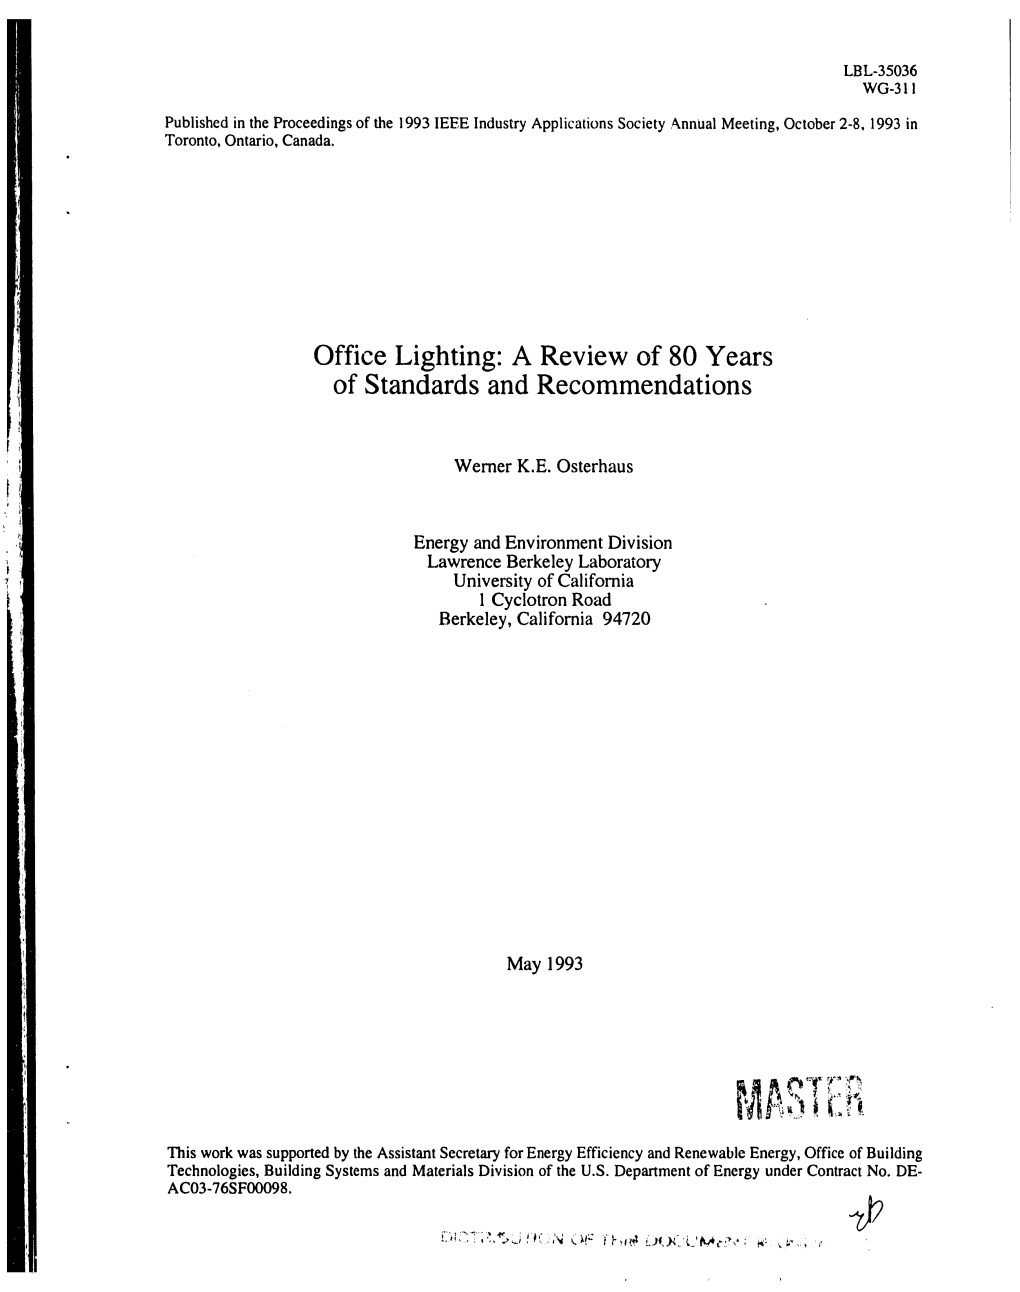 Office Lighting: a Review of 80 Years of Standards and Recommendations